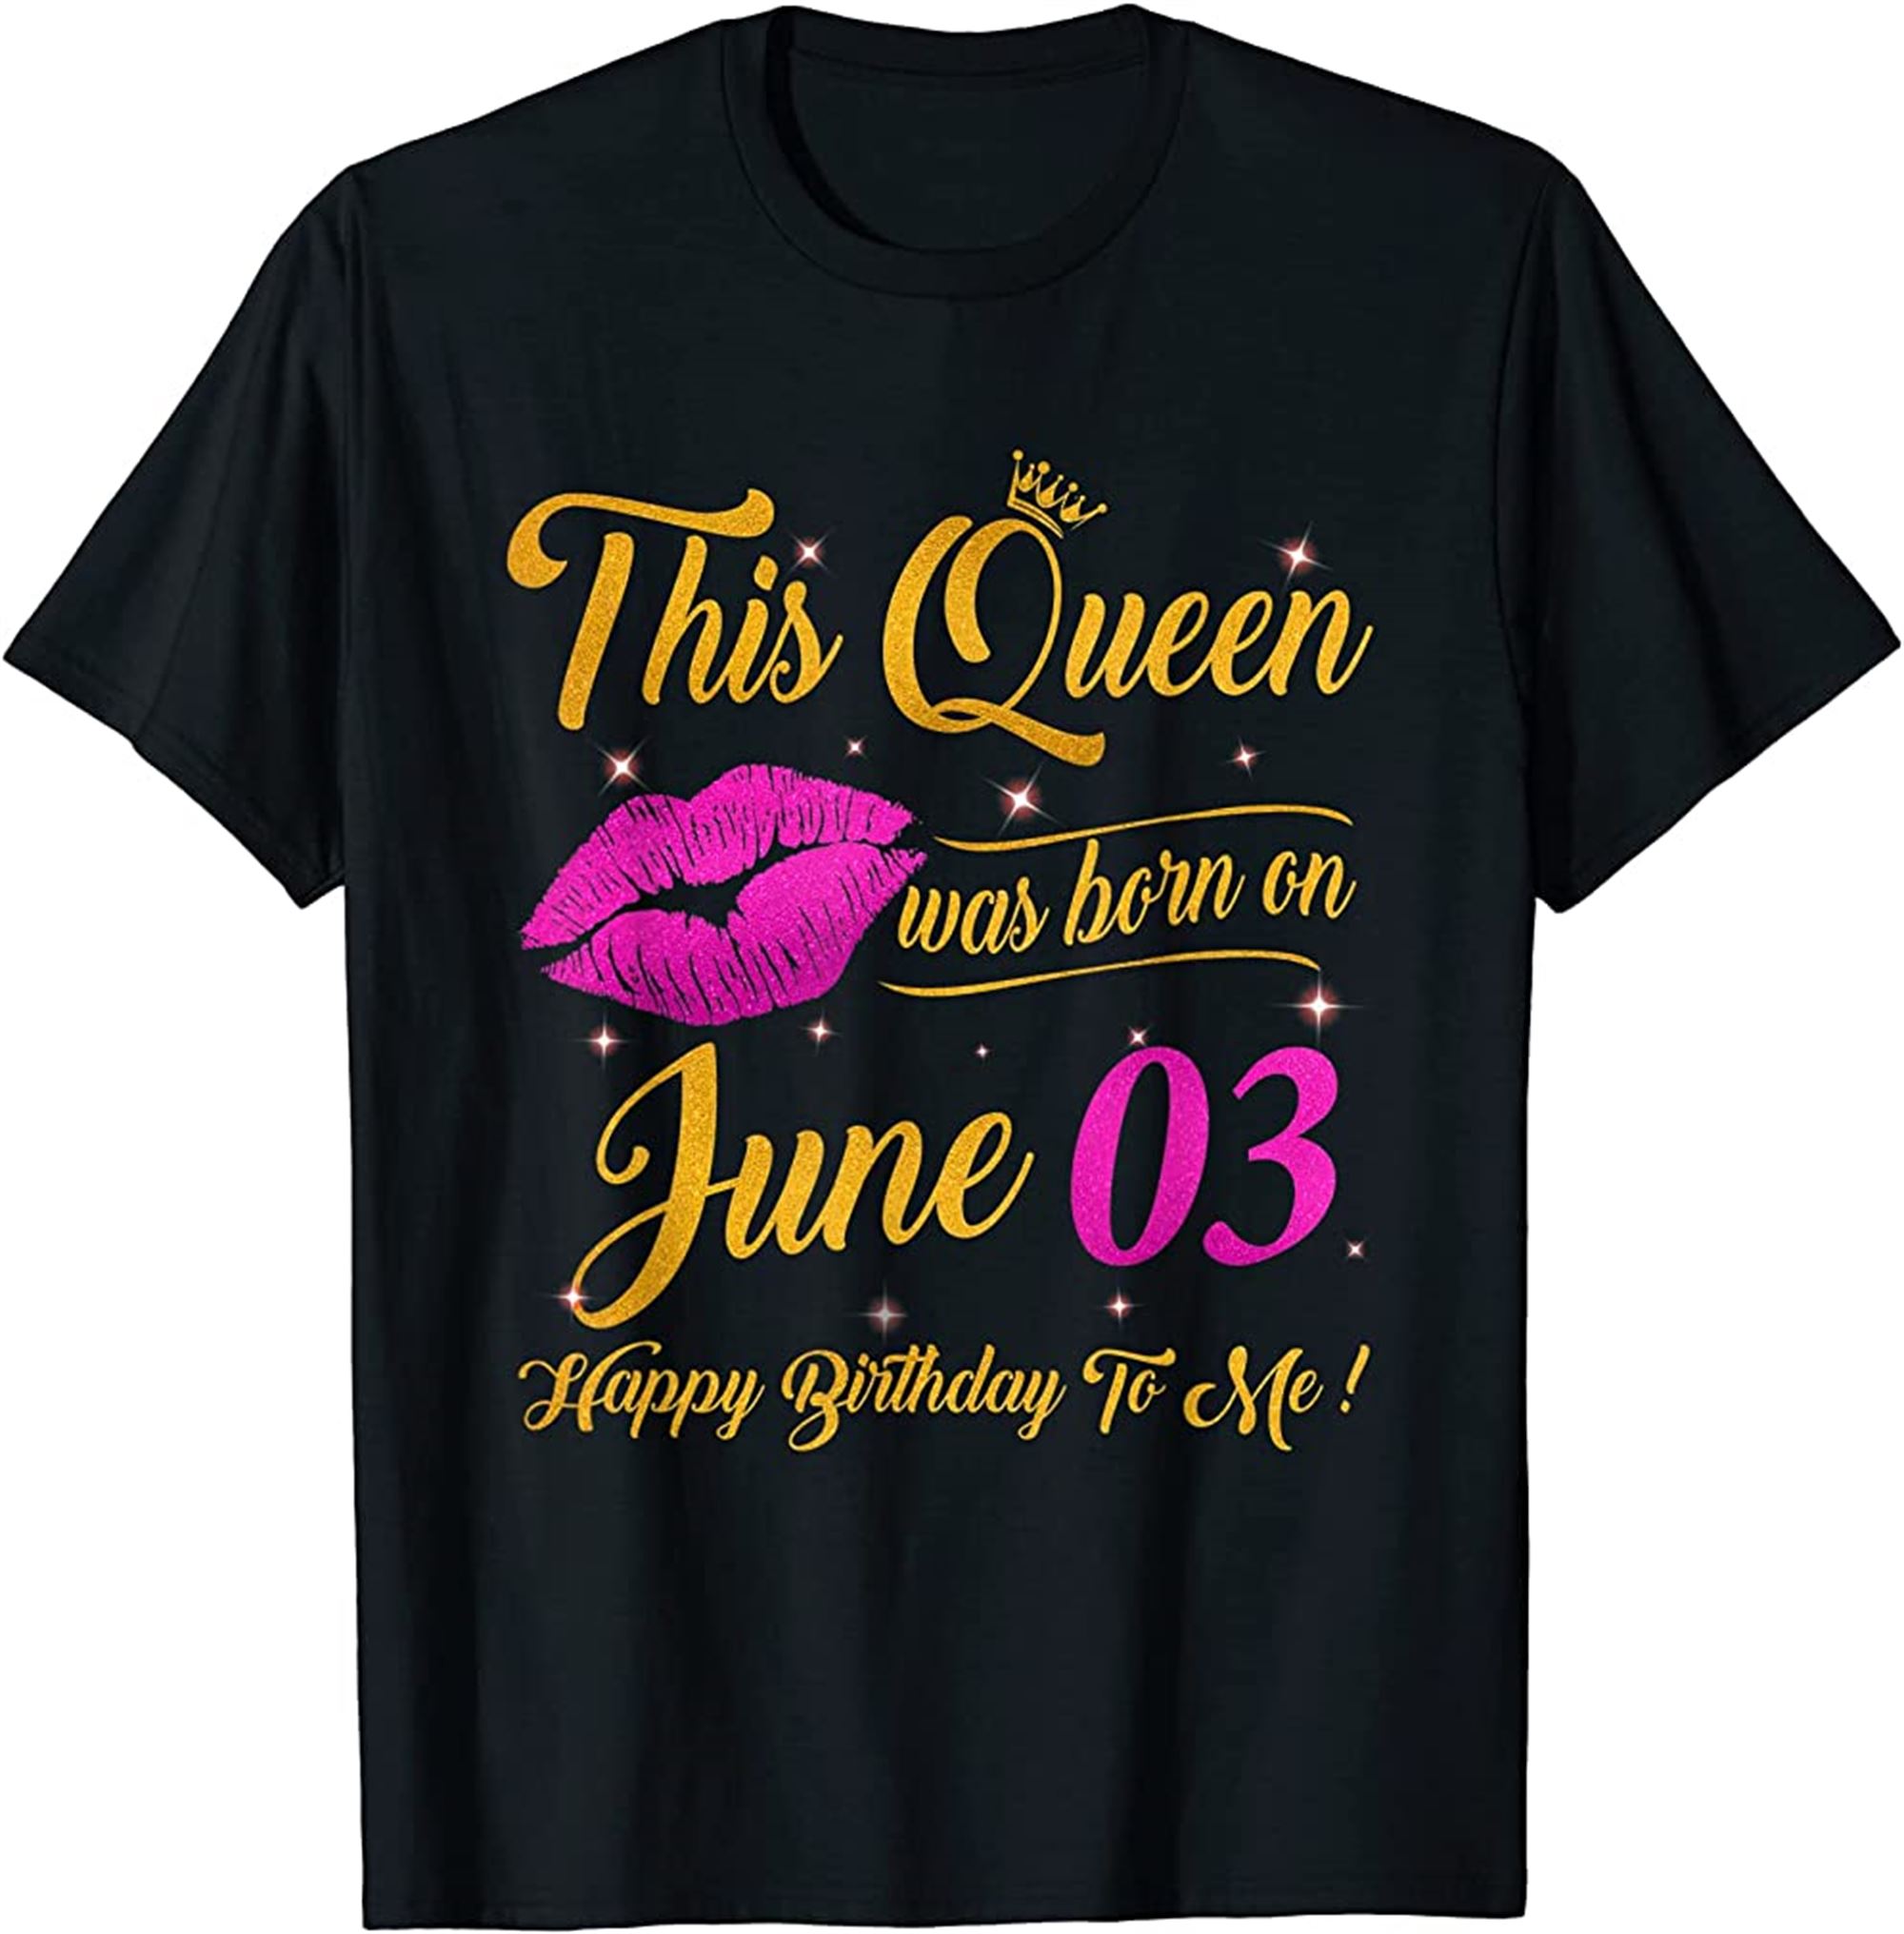 This Queen Was Born On June 3rd Pink Happy Birthday To Me T-shirt Size Up To 5xl